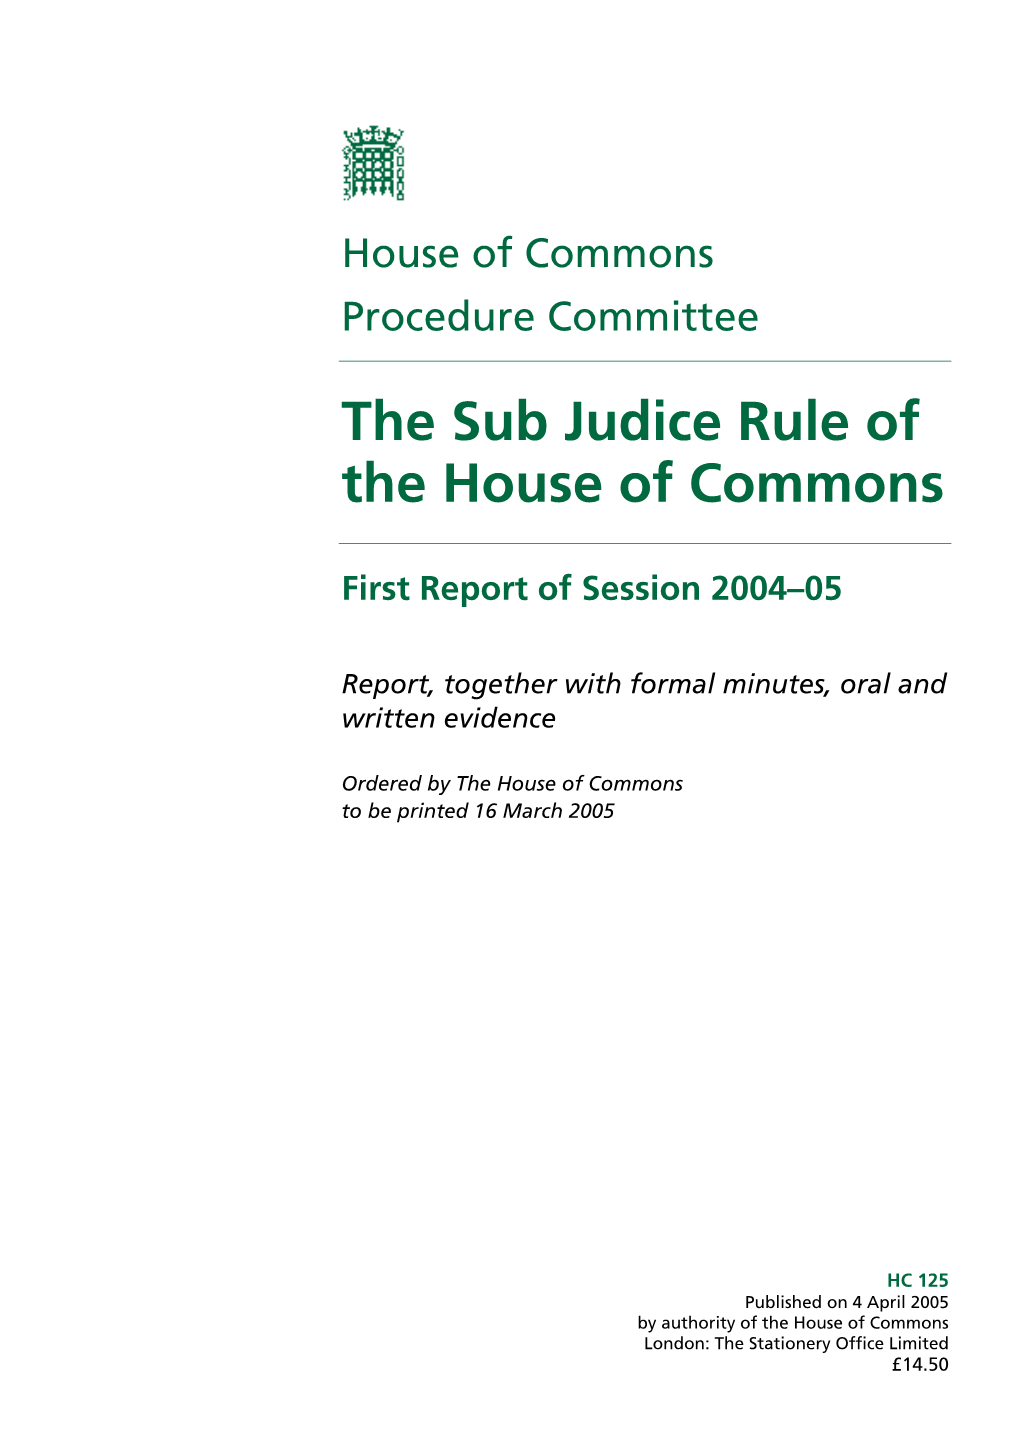 The Sub Judice Rule of the House of Commons